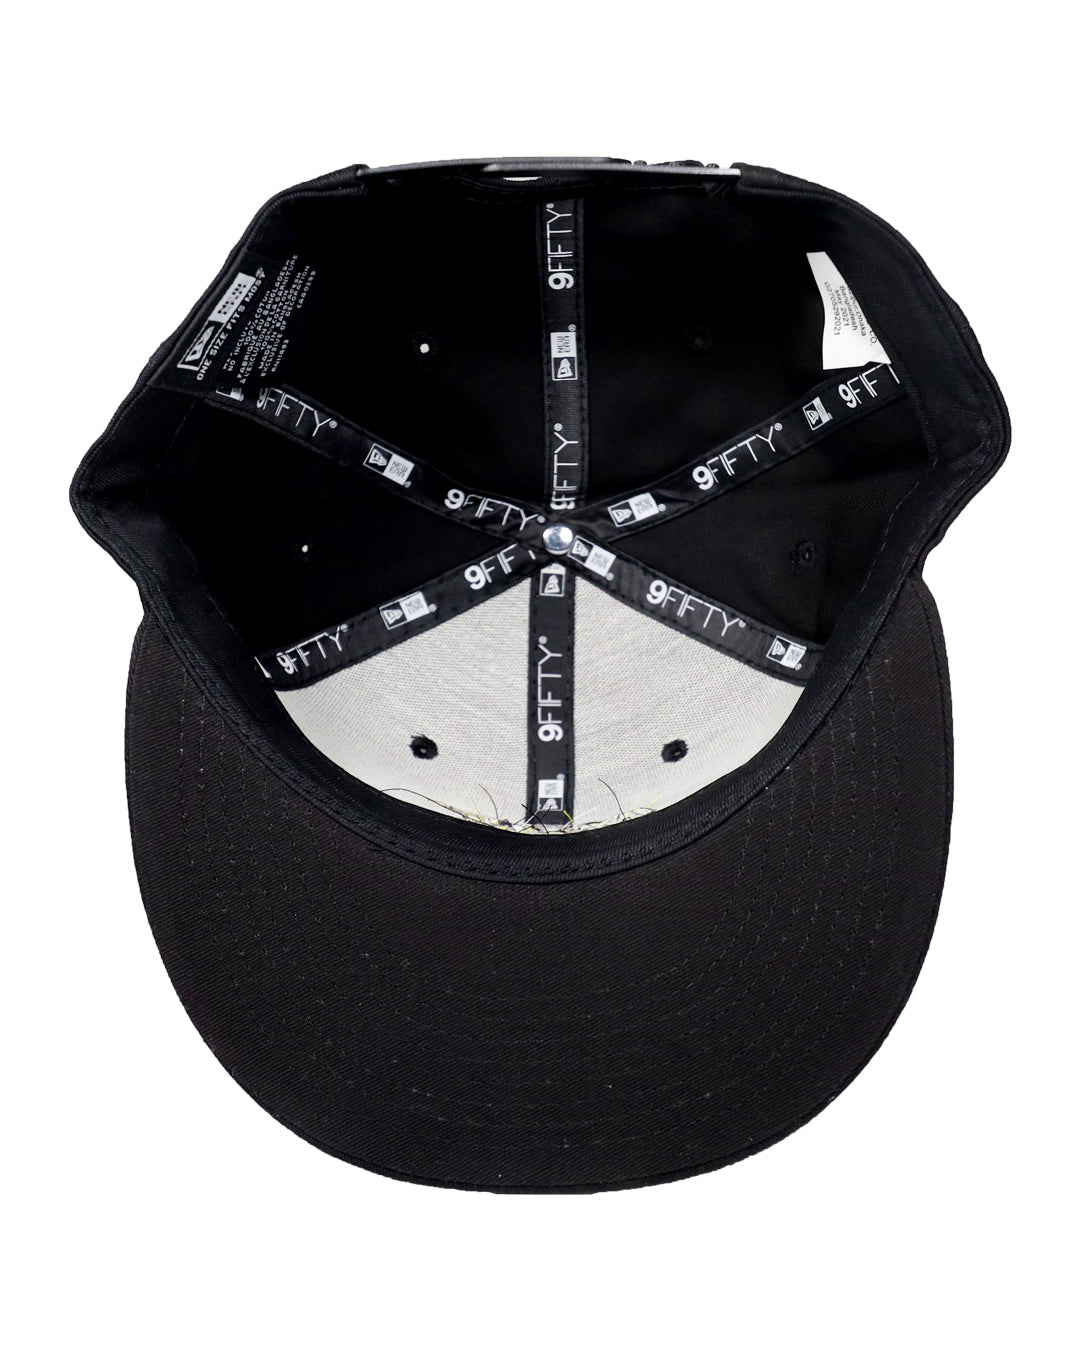 ImportWorx Black Cruise 9FIFTY Embroidered Snapback Hat